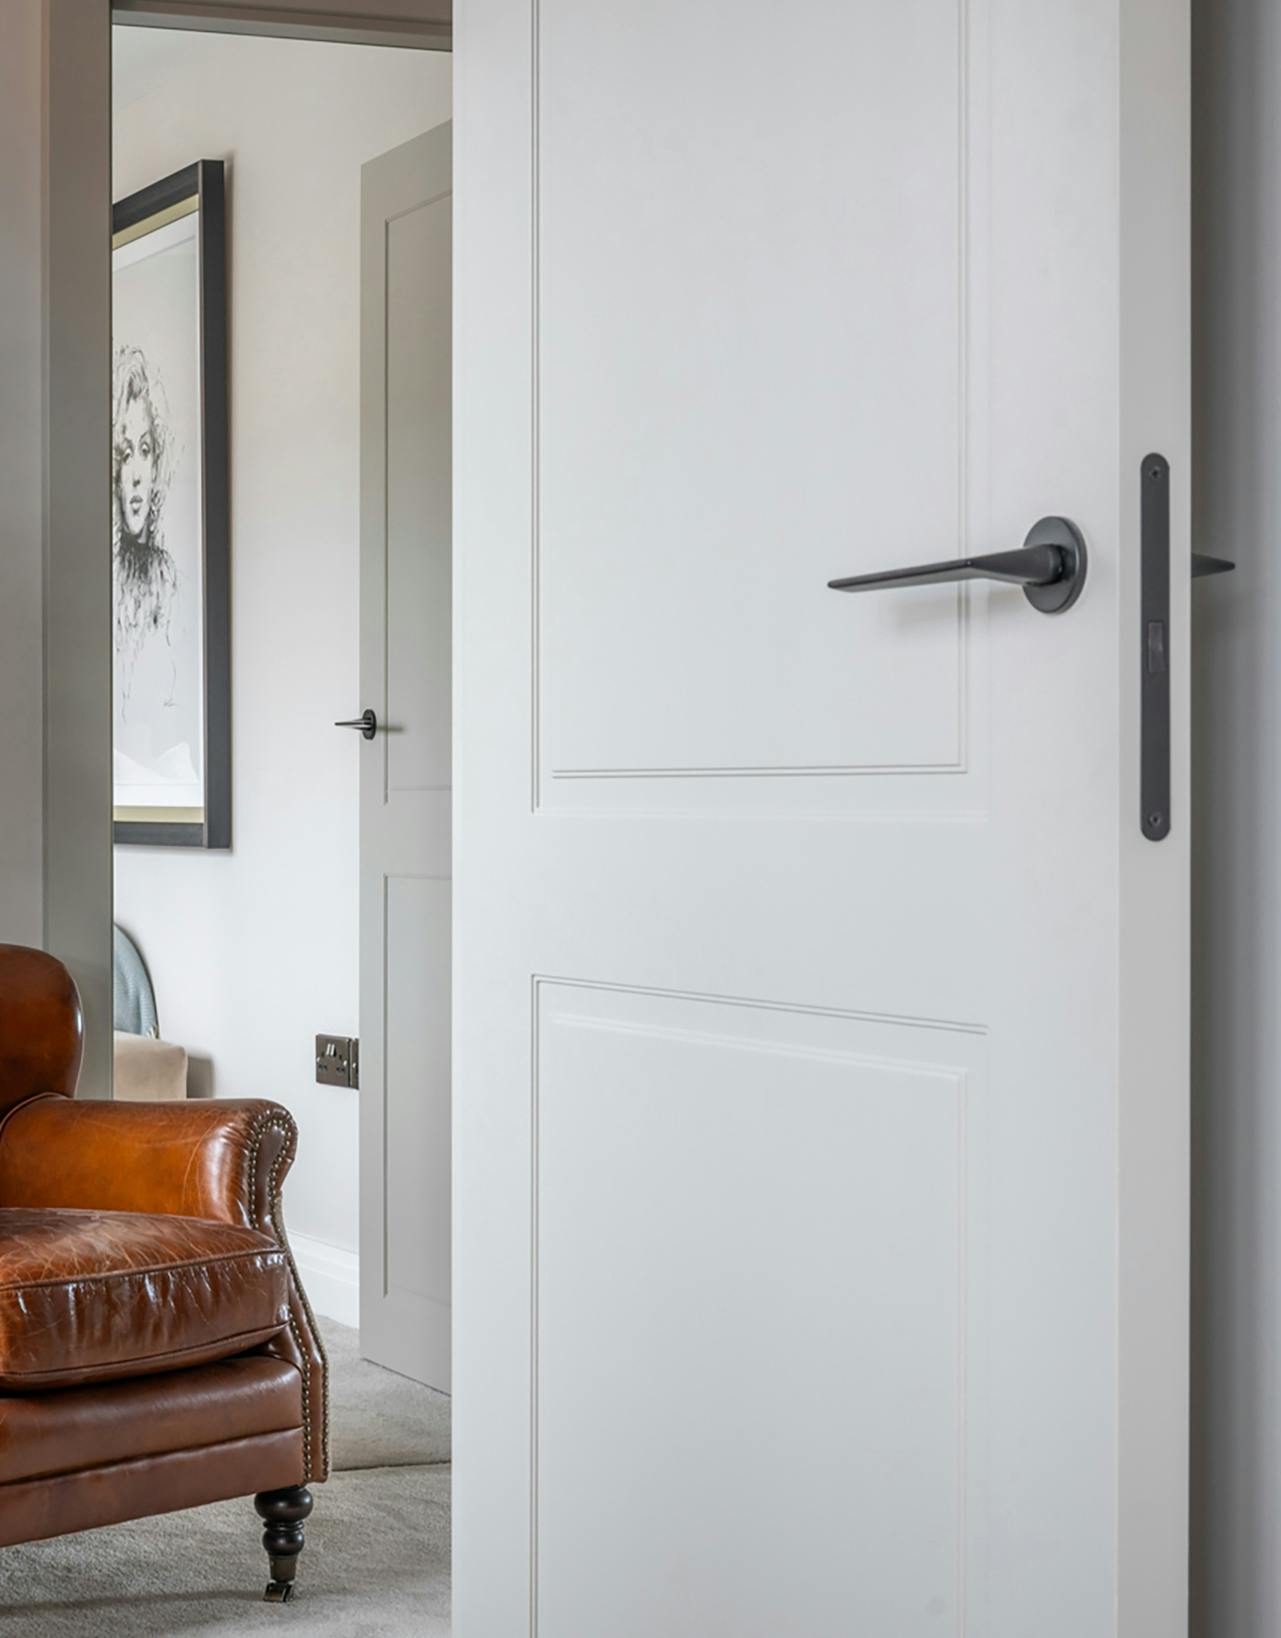 View of a spacious landing through an open Deuren door set, in a classic Victorian style and finished in a light grey paint.